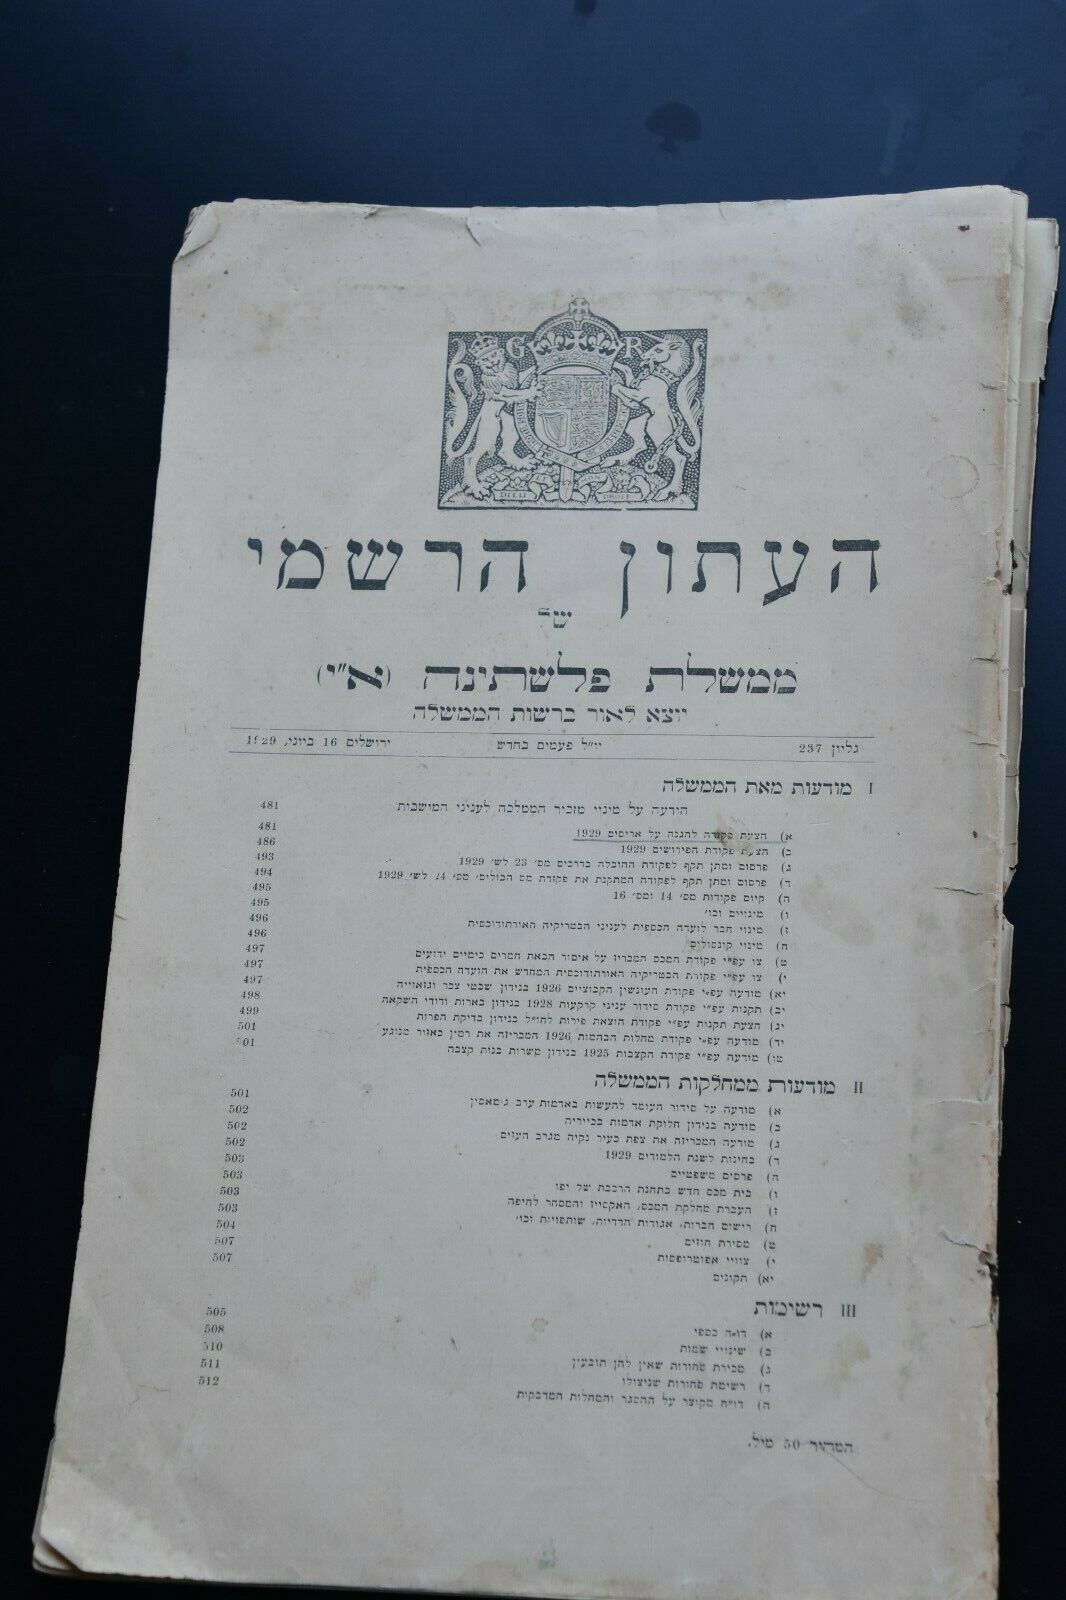   G.B.  -PALESTINE- OFFICIAL PAPER, PALESTINE GOVERNMENT, IN HEBREW  1929, 32 pp